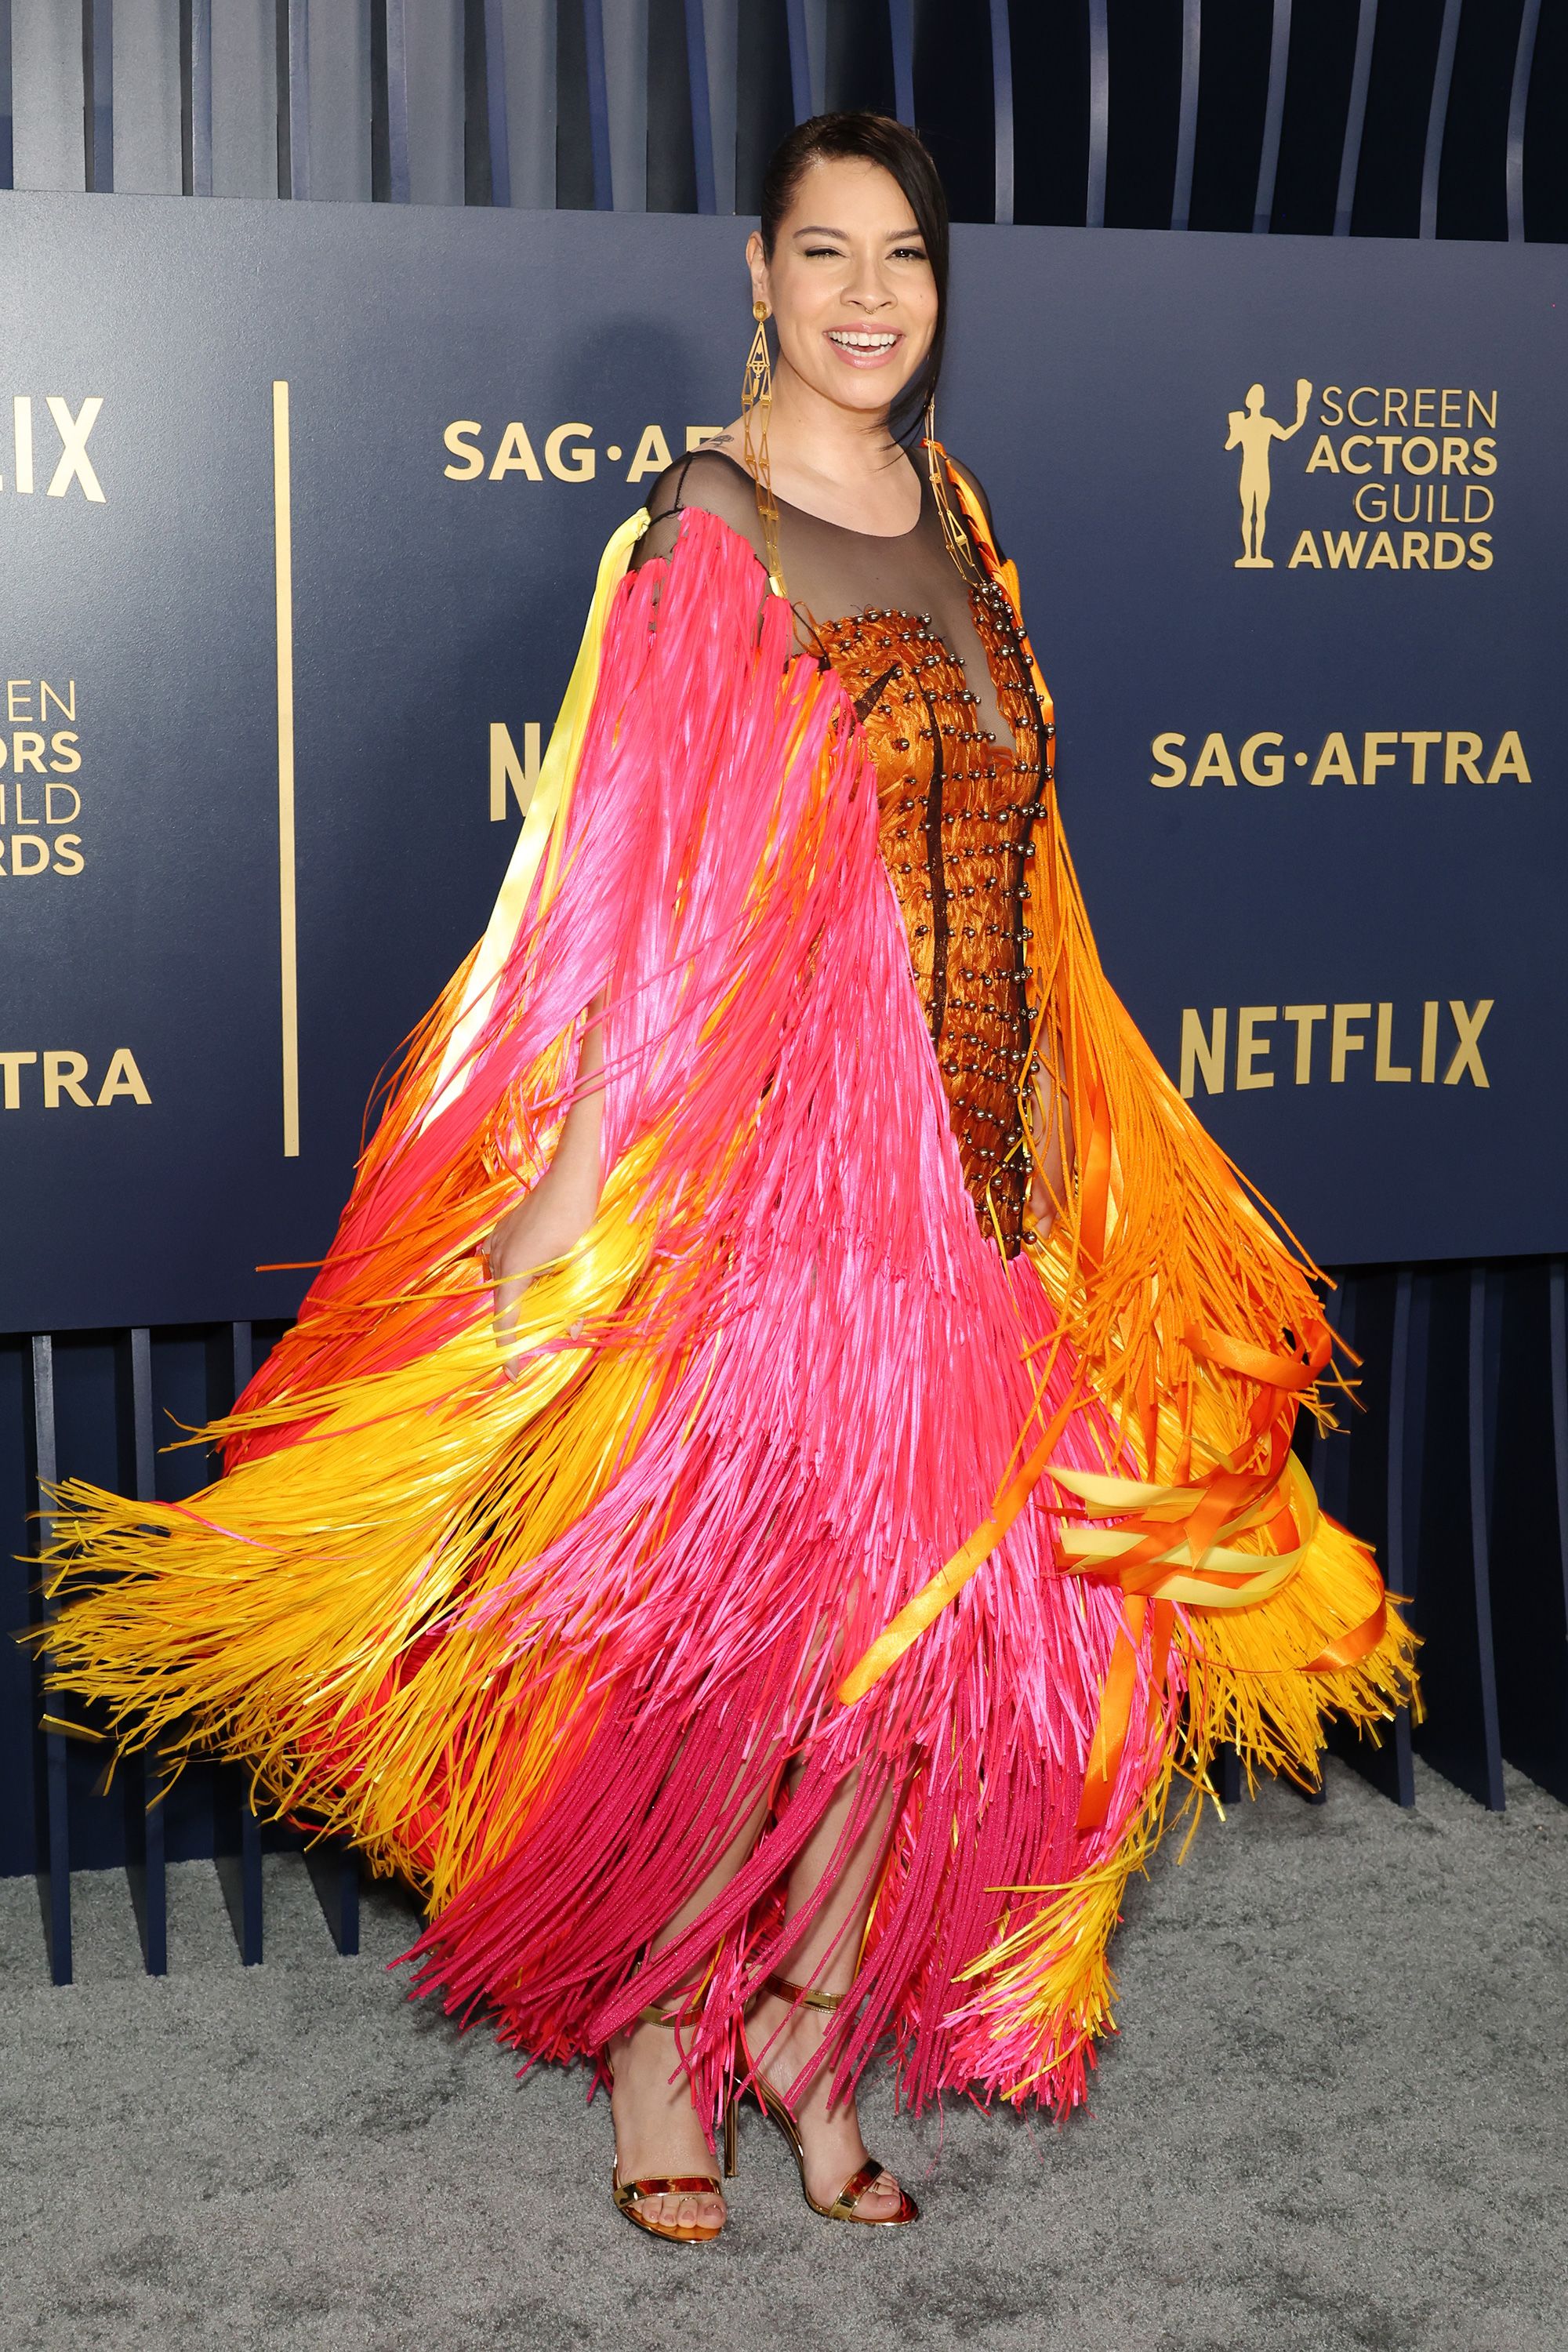 Gladstone's "Killers of the Flower Moon" co-star Cara Jade Myers also donned colorful fringe.